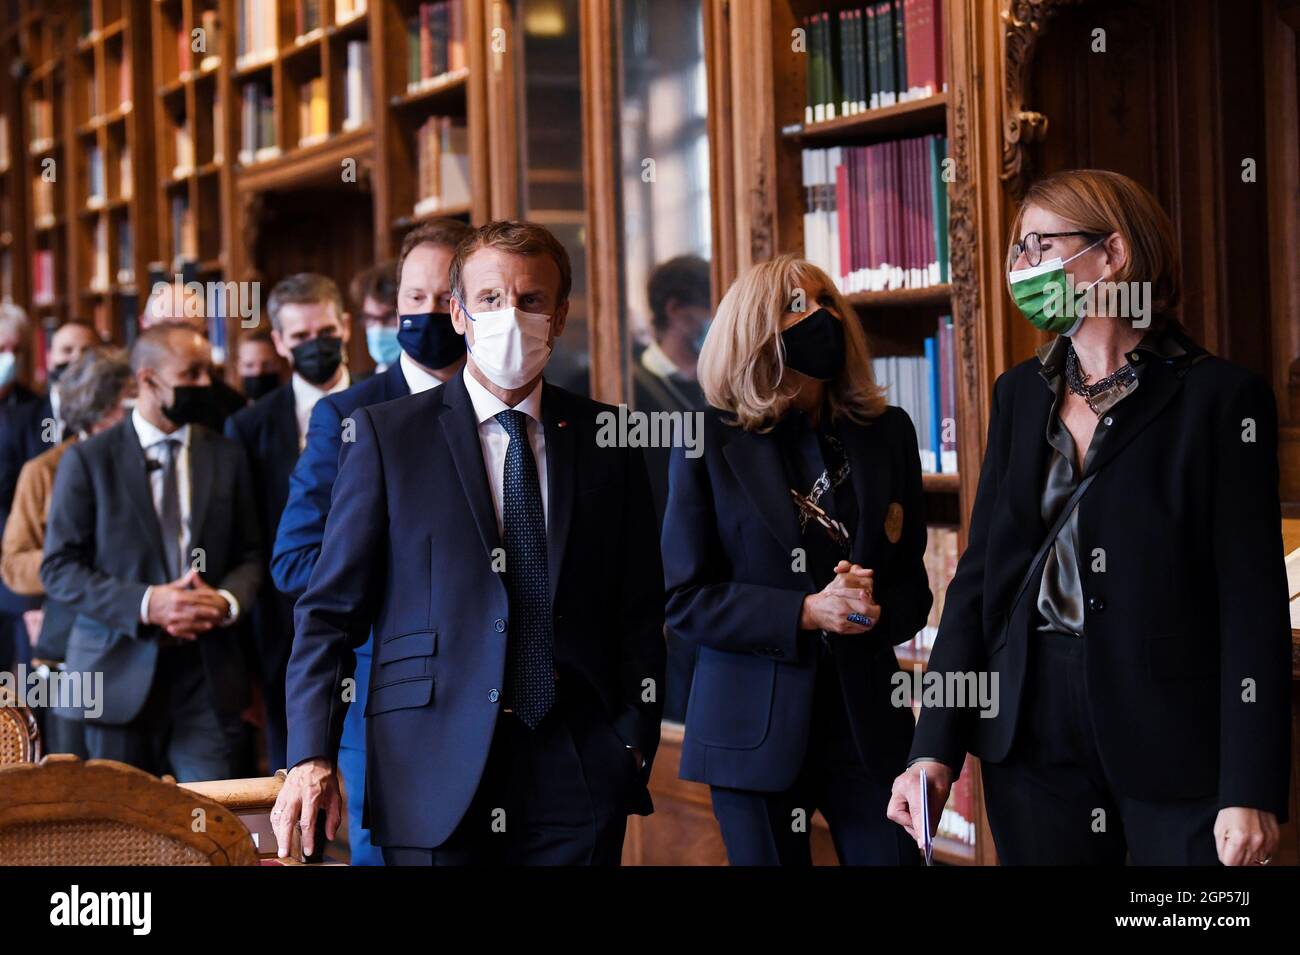 French President Emmanuel Macron, his wife Brigitte Macron and President of  the Bibliotheque Nationale de France Laurence Engel (R) visit the Richelieu  site of the Bibliotheque Nationale de France, after the completion